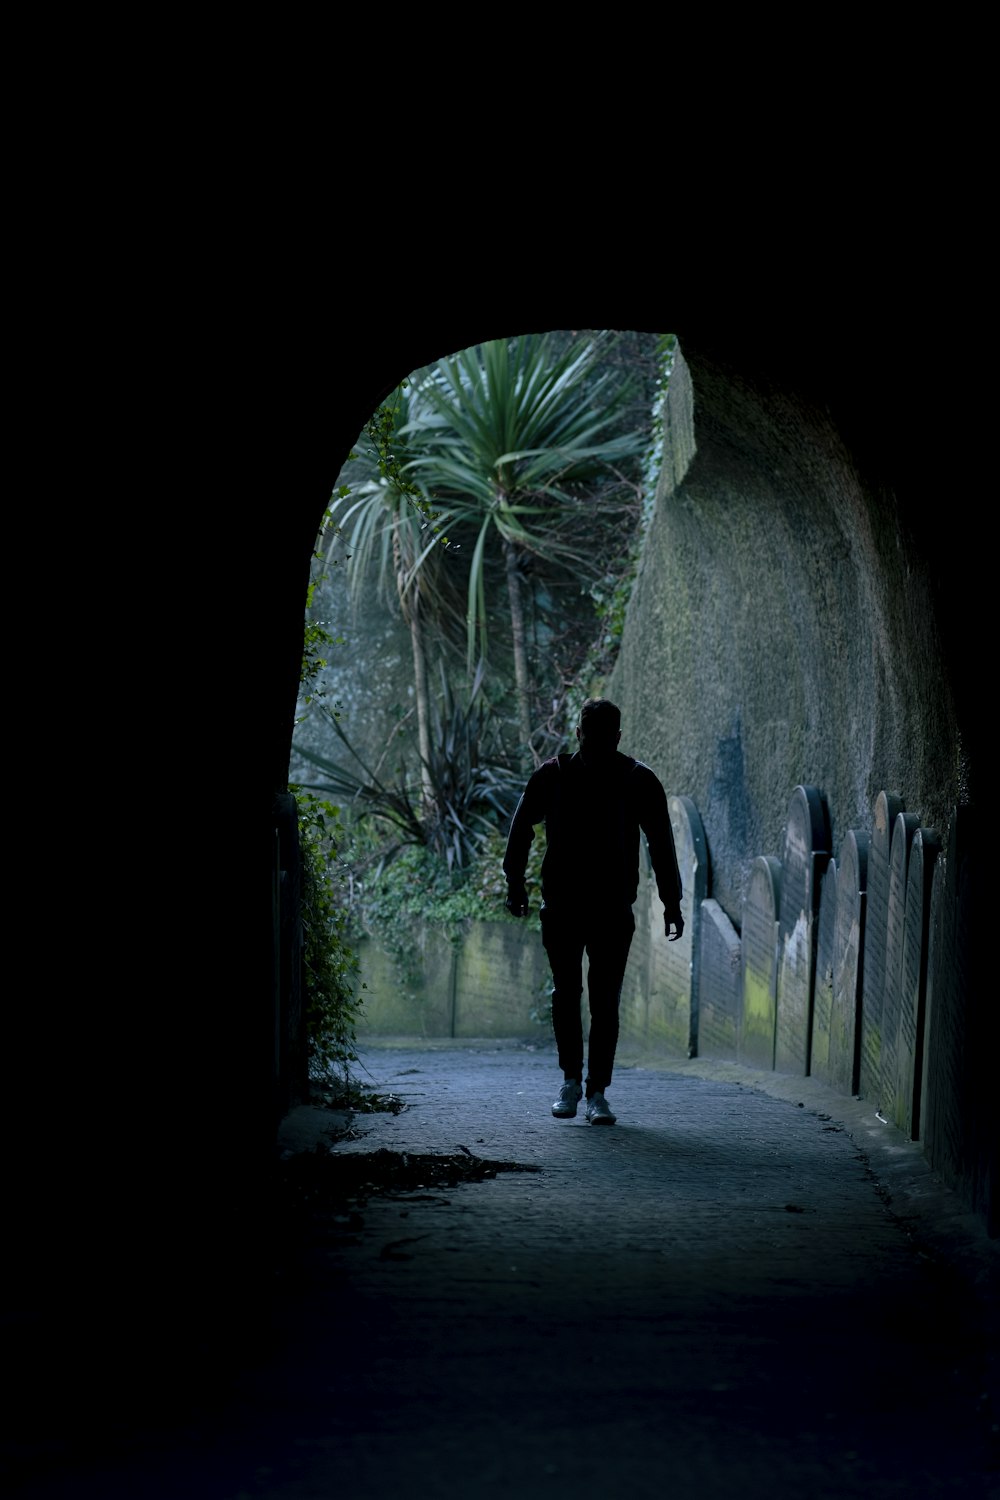 a man walking into a dark tunnel with trees in the background